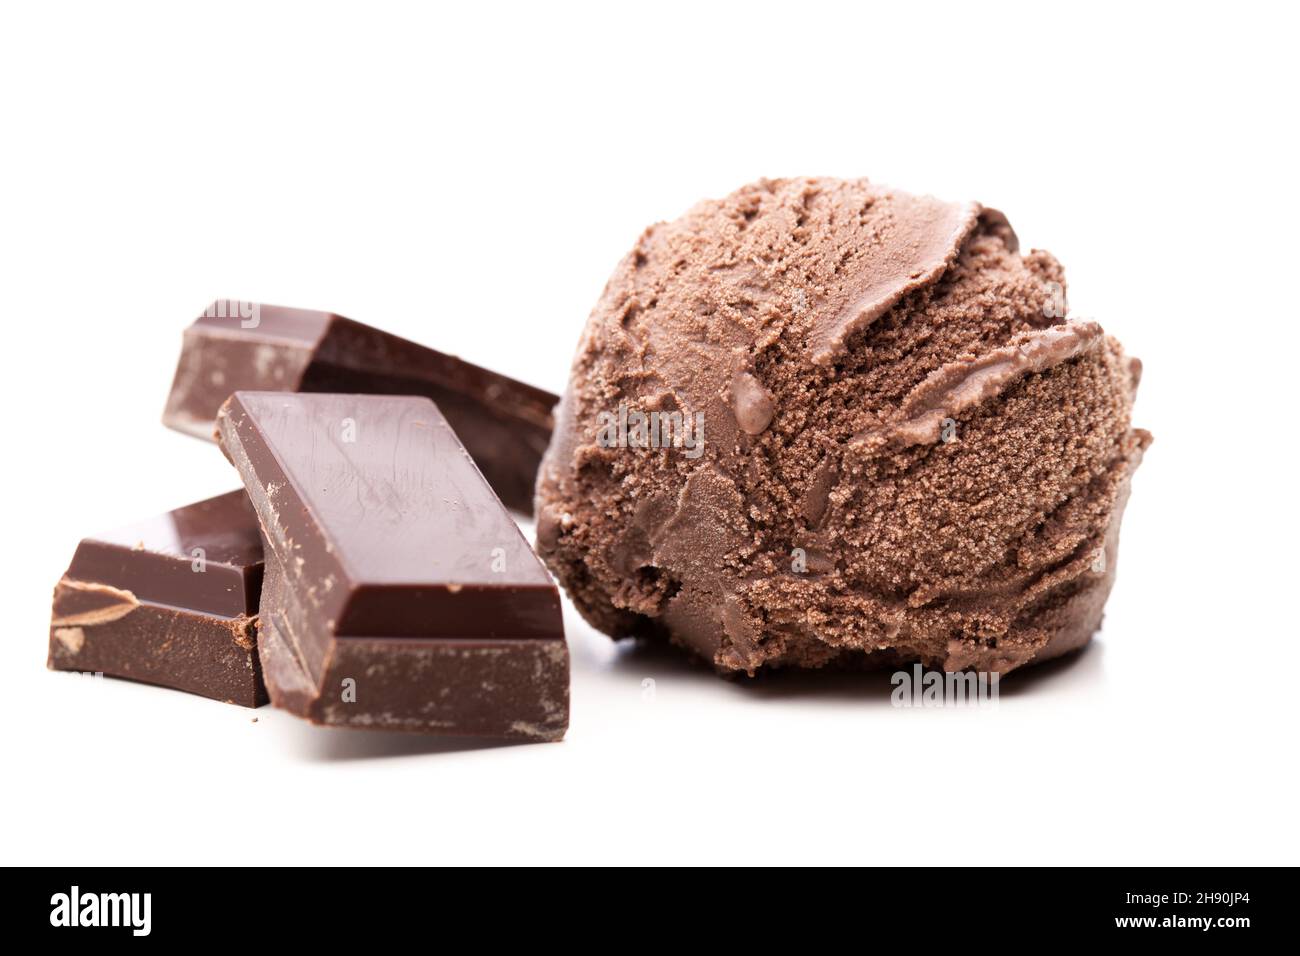 A scoop of chocolate ice cream with three pieces of chocolate isolated on white background Stock Photo